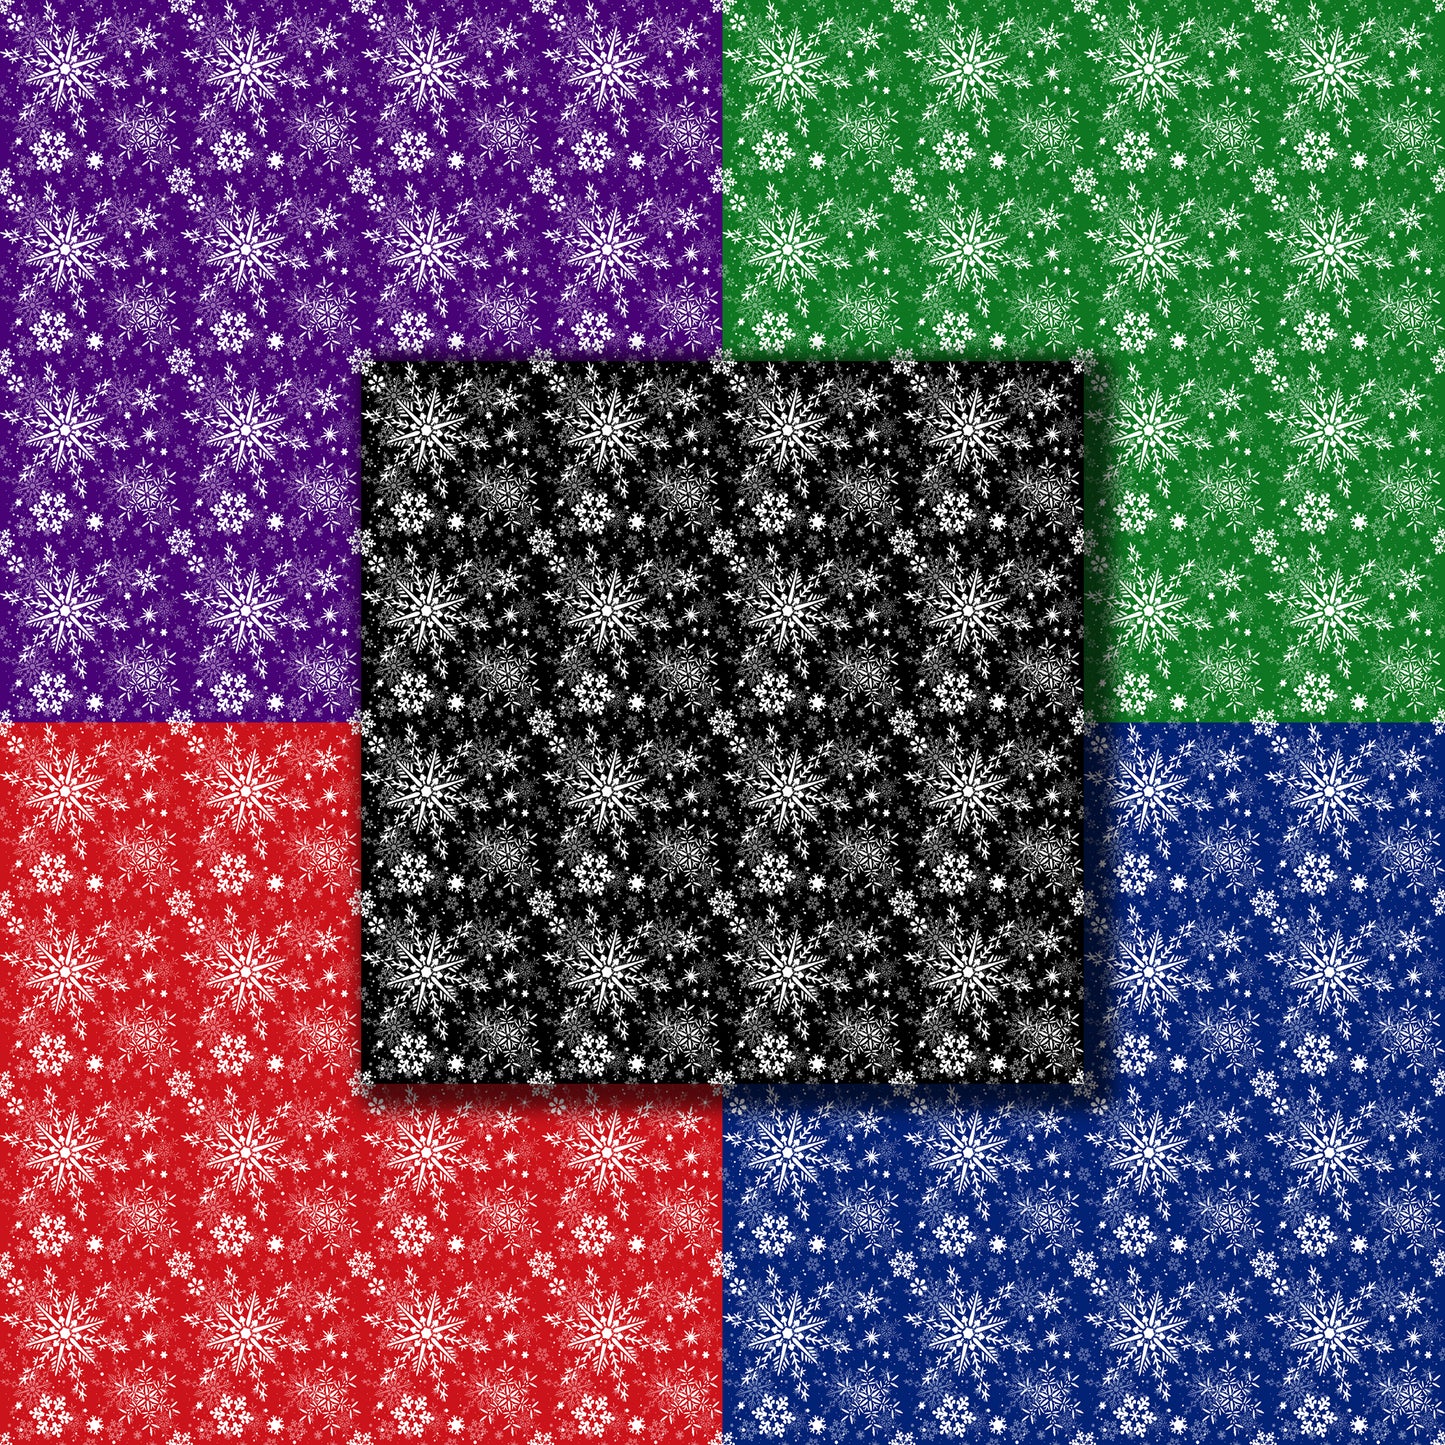 Snowflake Wishes 12X12 Paper Pack - 8659